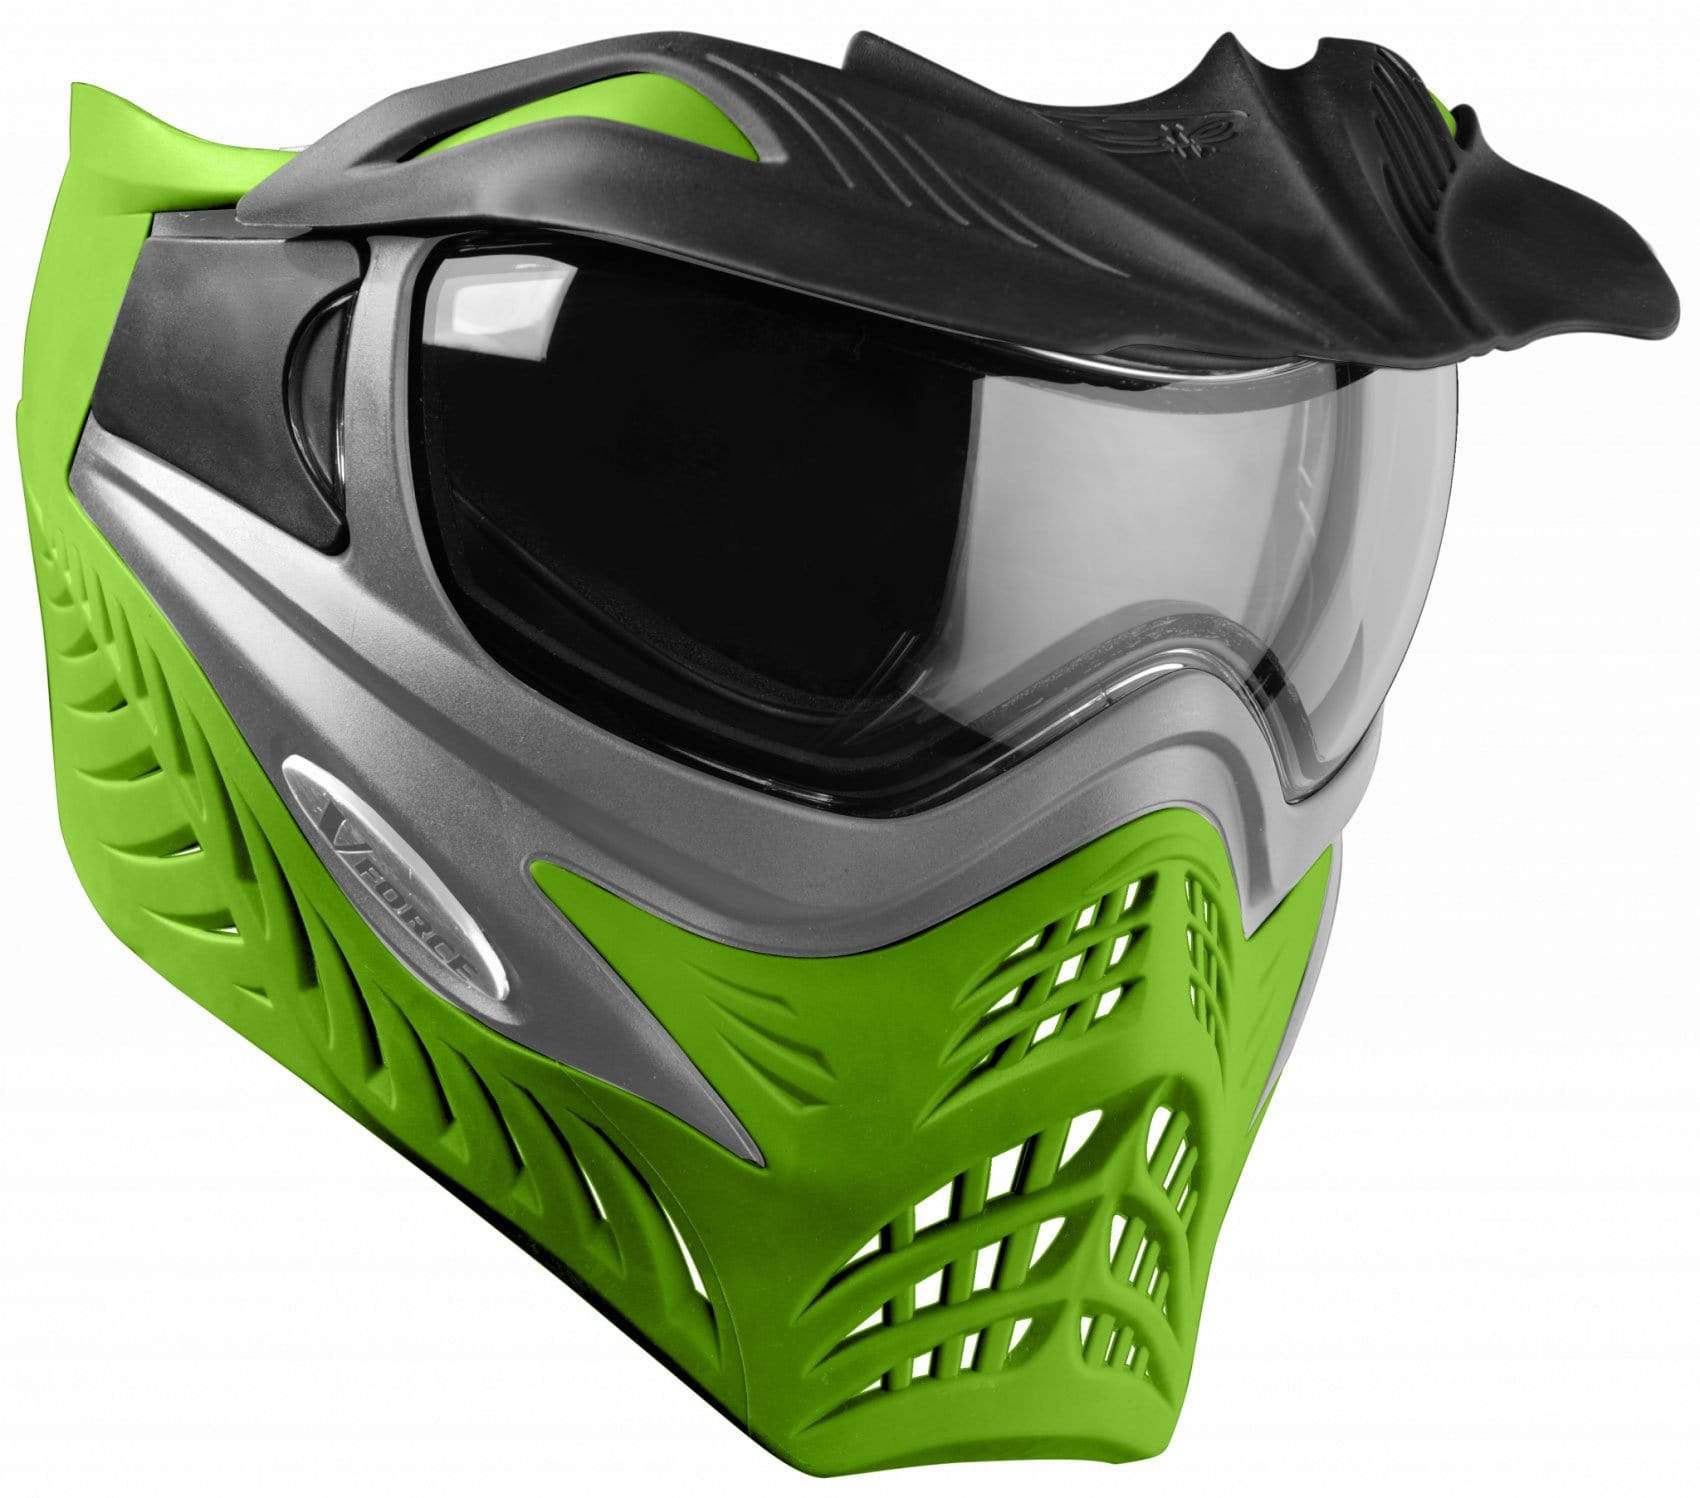 V-Force Grill SC Paintball Mask - Grey on Lime - Eminent Paintball And Airsoft